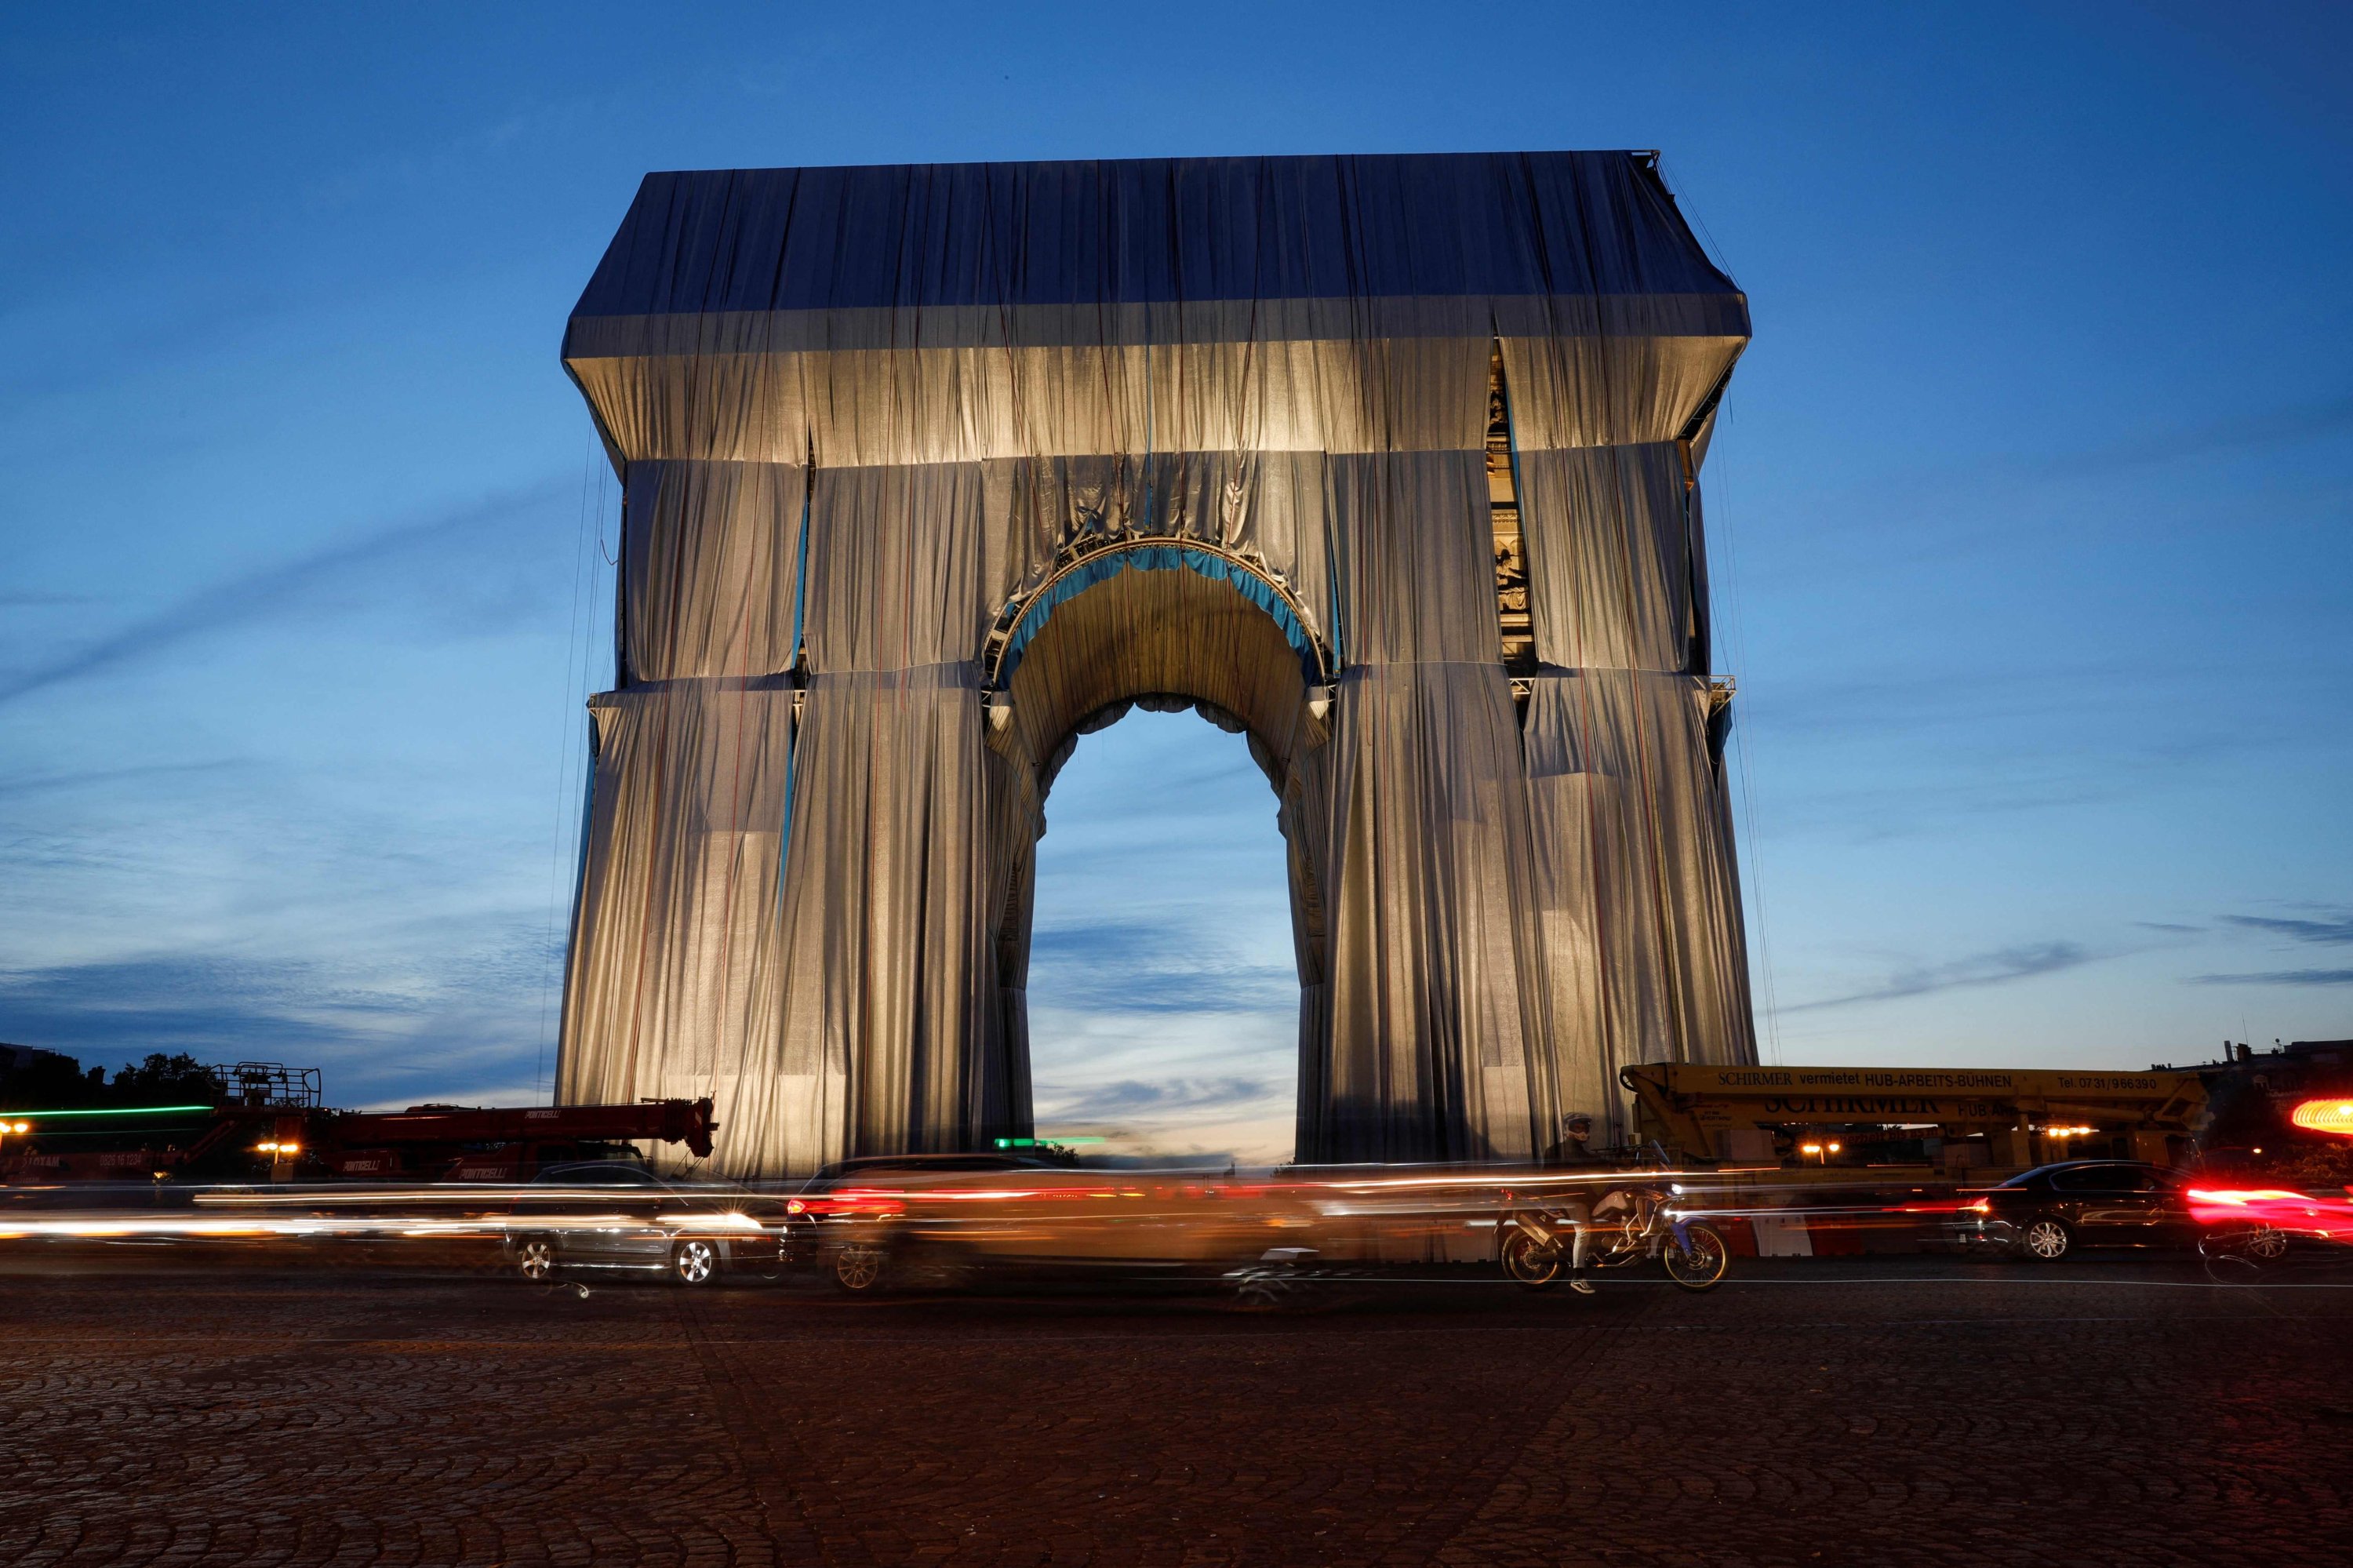 The photograph shows the Arc de Triomphe wrapped in silver-blue fabric as it was designed by the late artist Christo, Paris, France, Sept. 13, 2021 (AFP Photo)